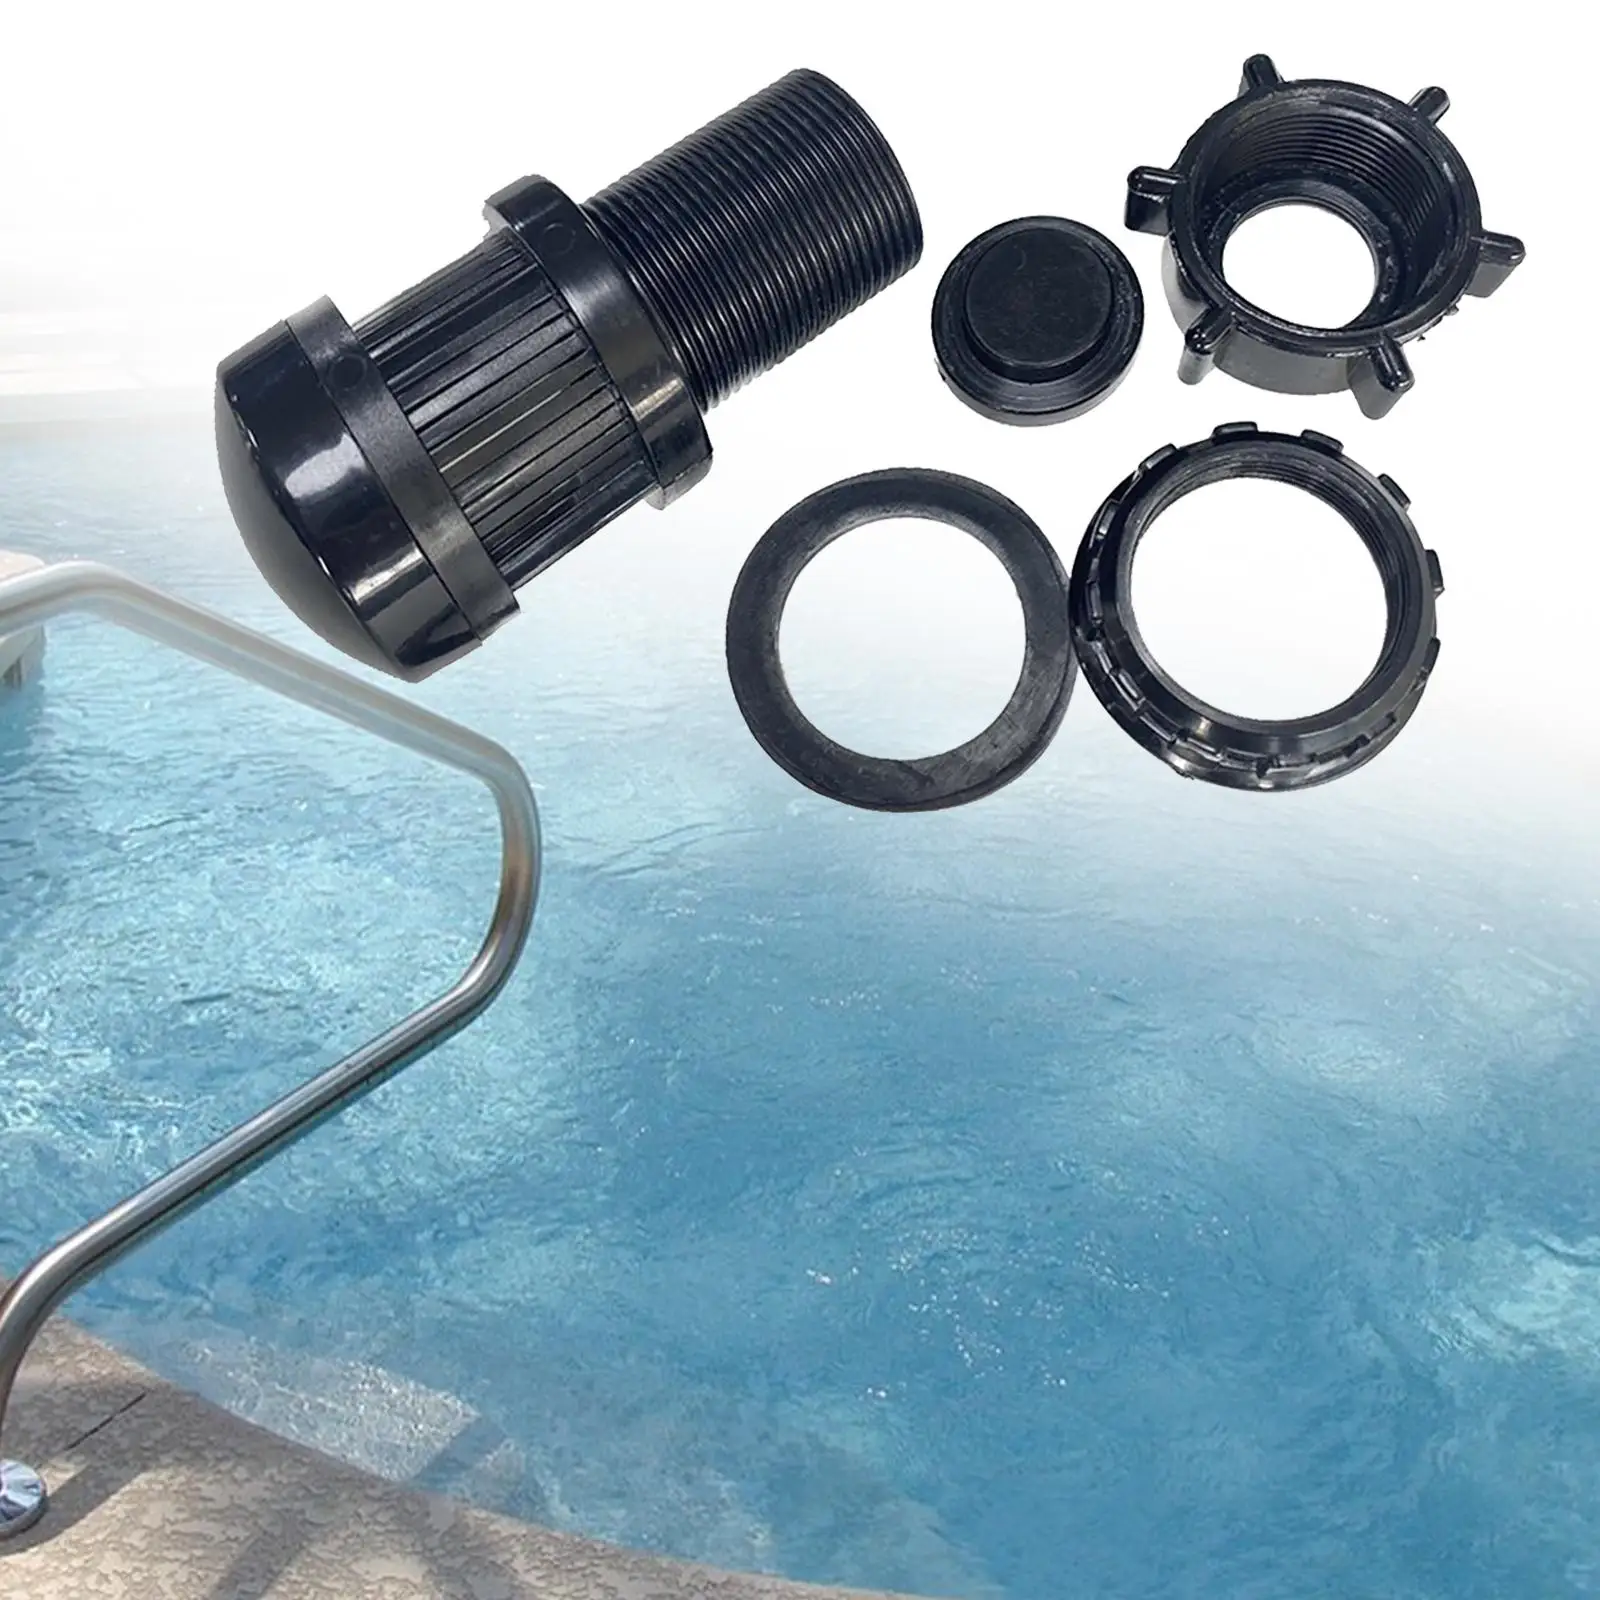 Sand Filter Drain Plug Assembly Water Drain Set for Sand Tank Maintenance